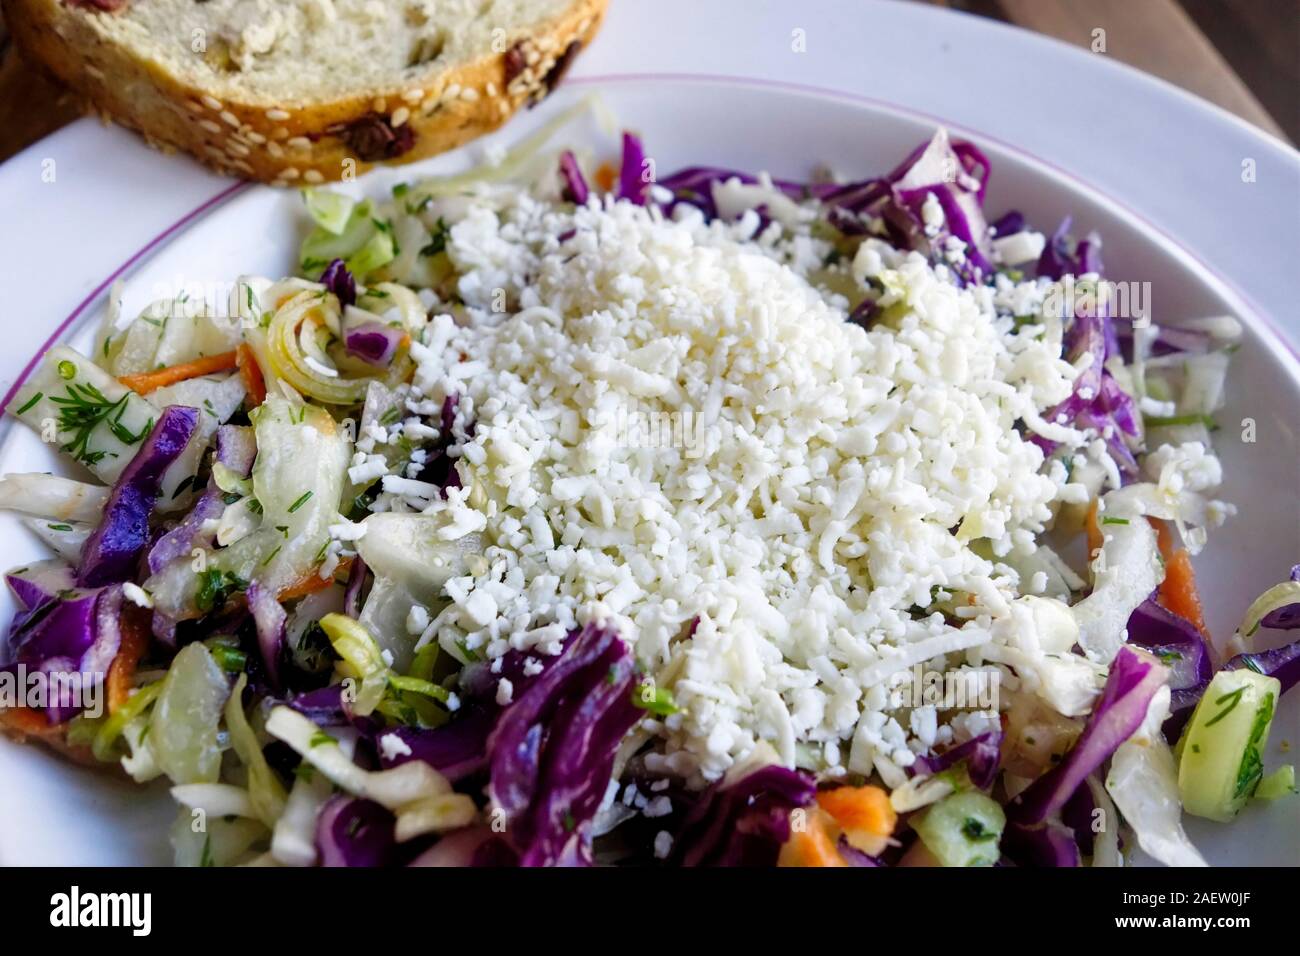 Greek Cuisine. Goat and Sheep Cheese Mixed Vegetable Salad with Olive Bread Stock Photo